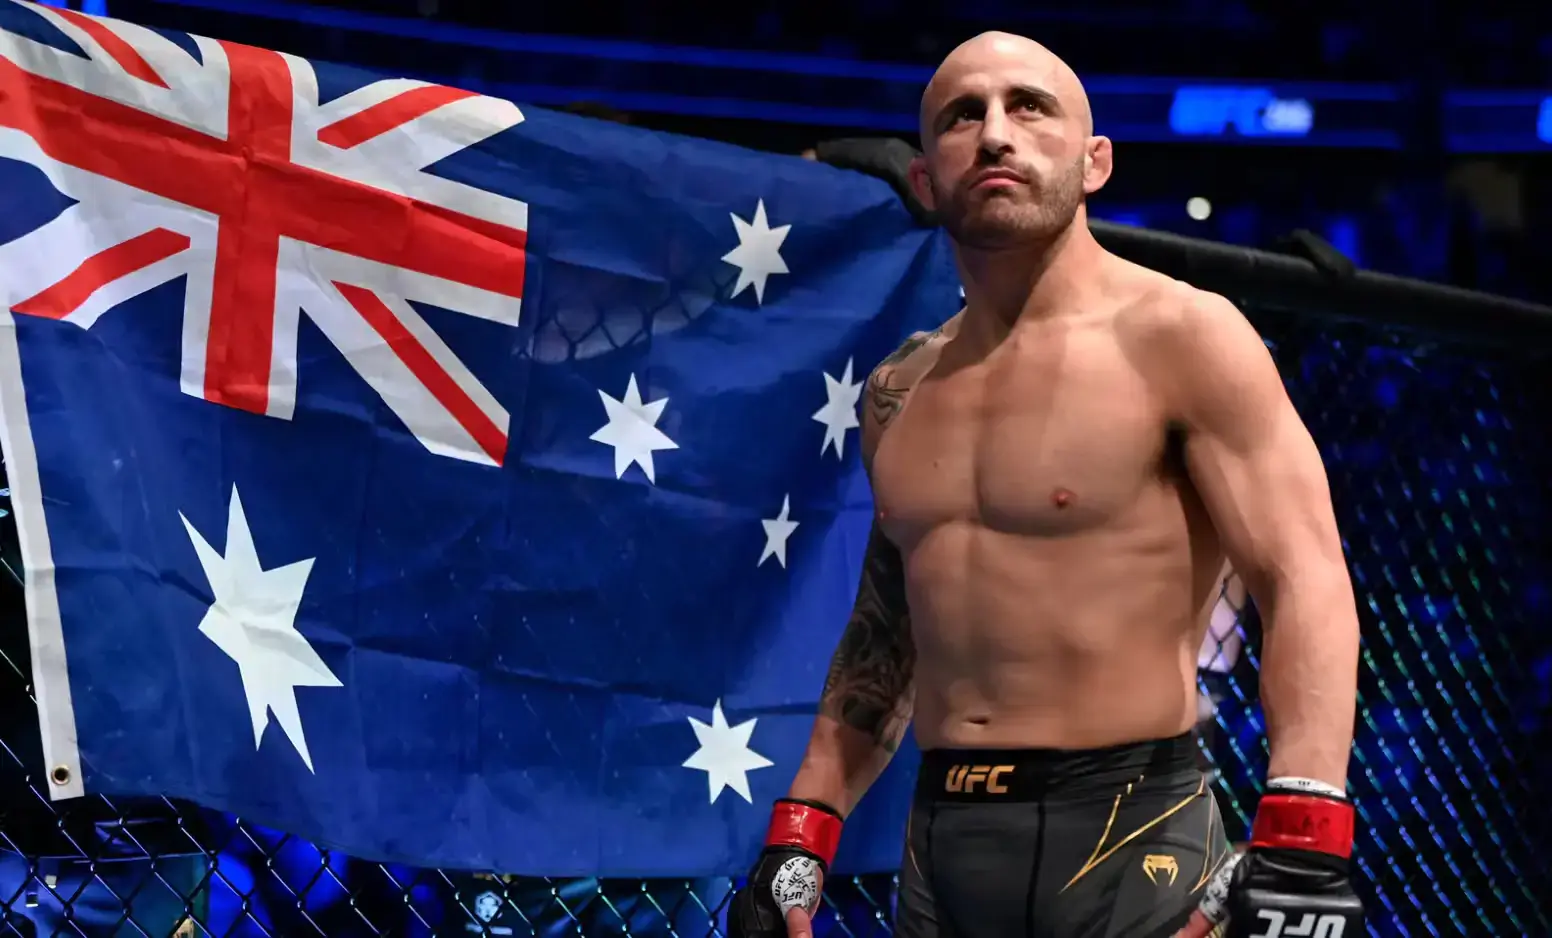 Ticket information and how to attend UFC 305 in Perth